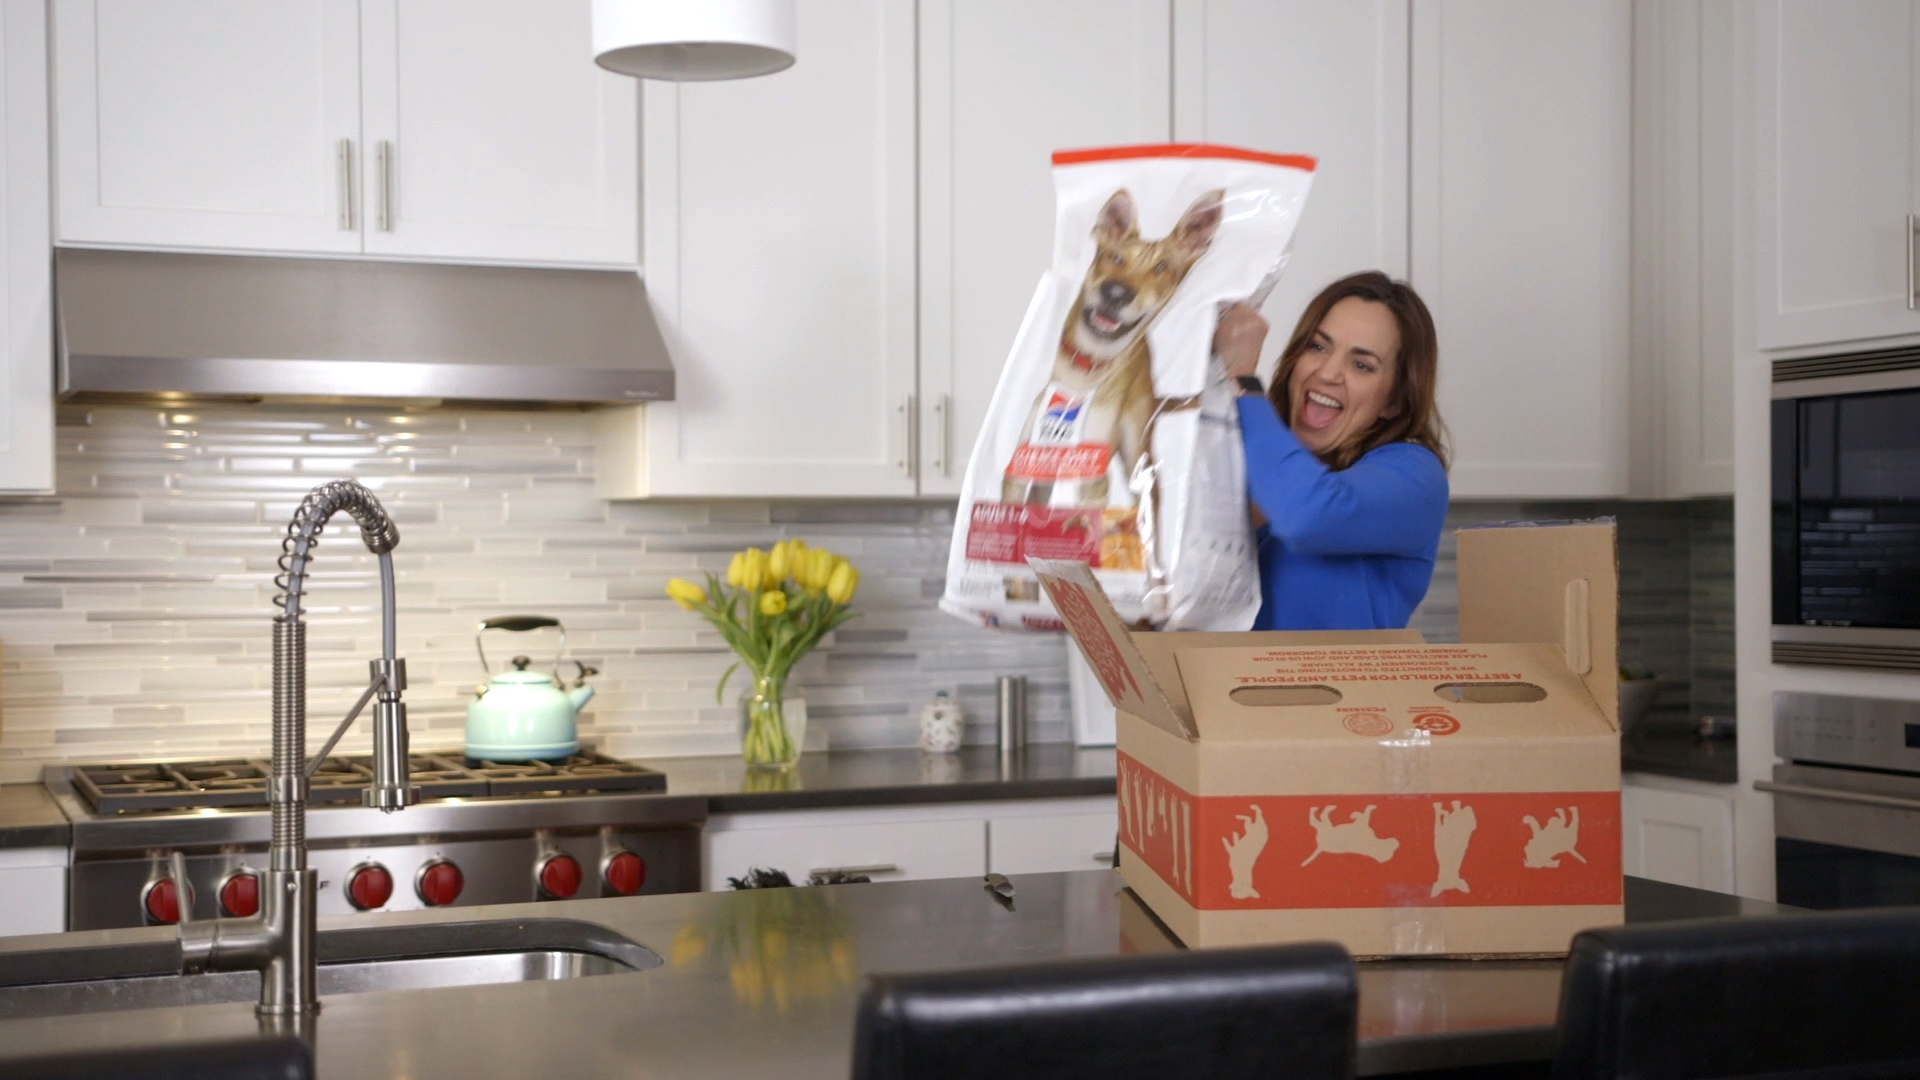 A woman lifts a bag of dog food from a cardboard box. She is standing in a kitchen.